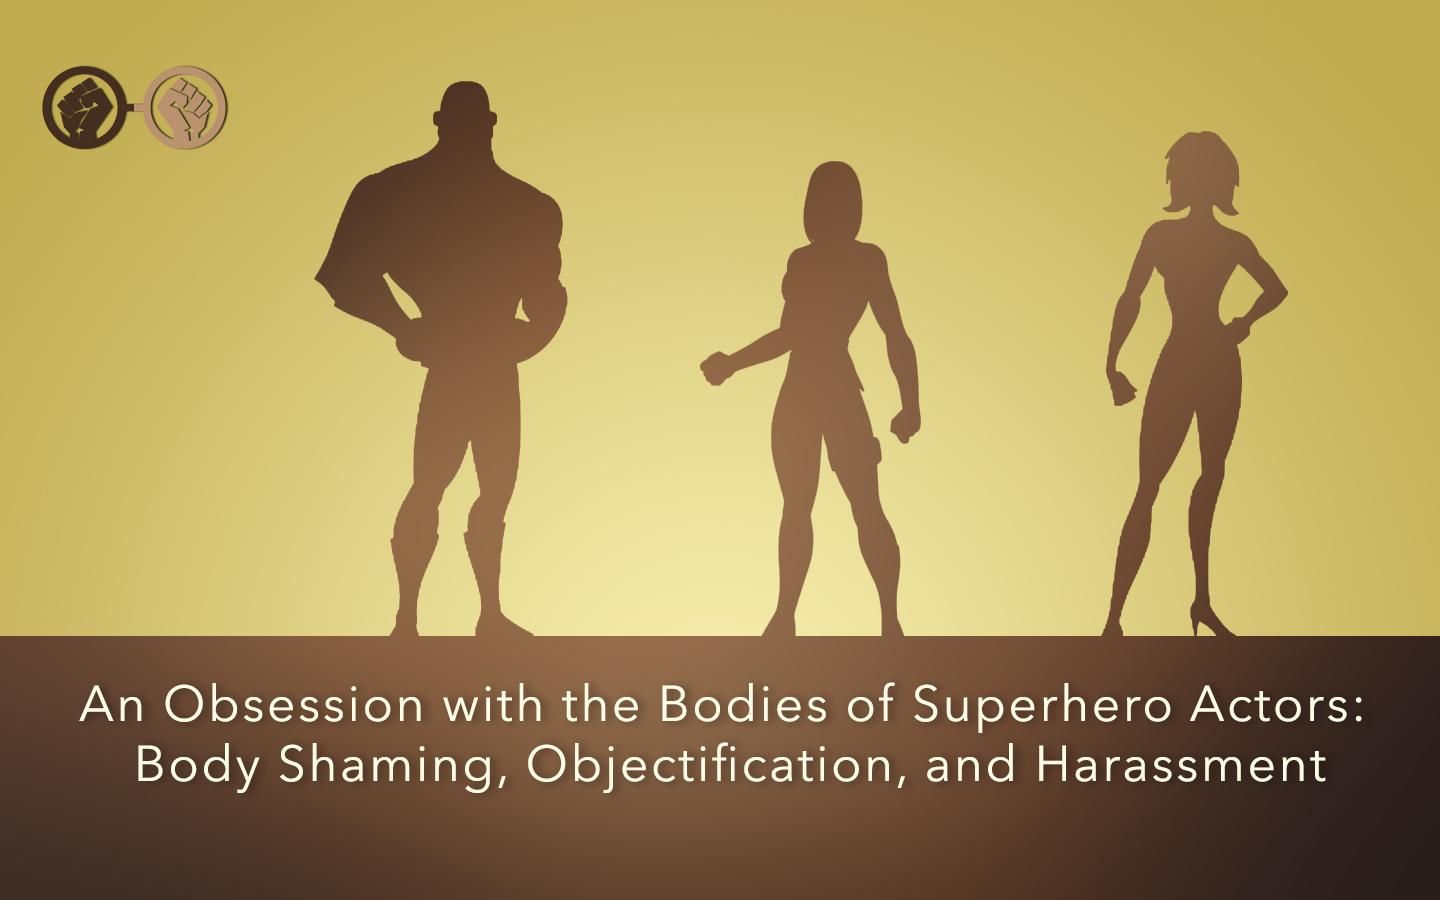 An Obsession With the Bodies of Superhero Actors: Body Shaming, Sexual Harassment, and Objectification